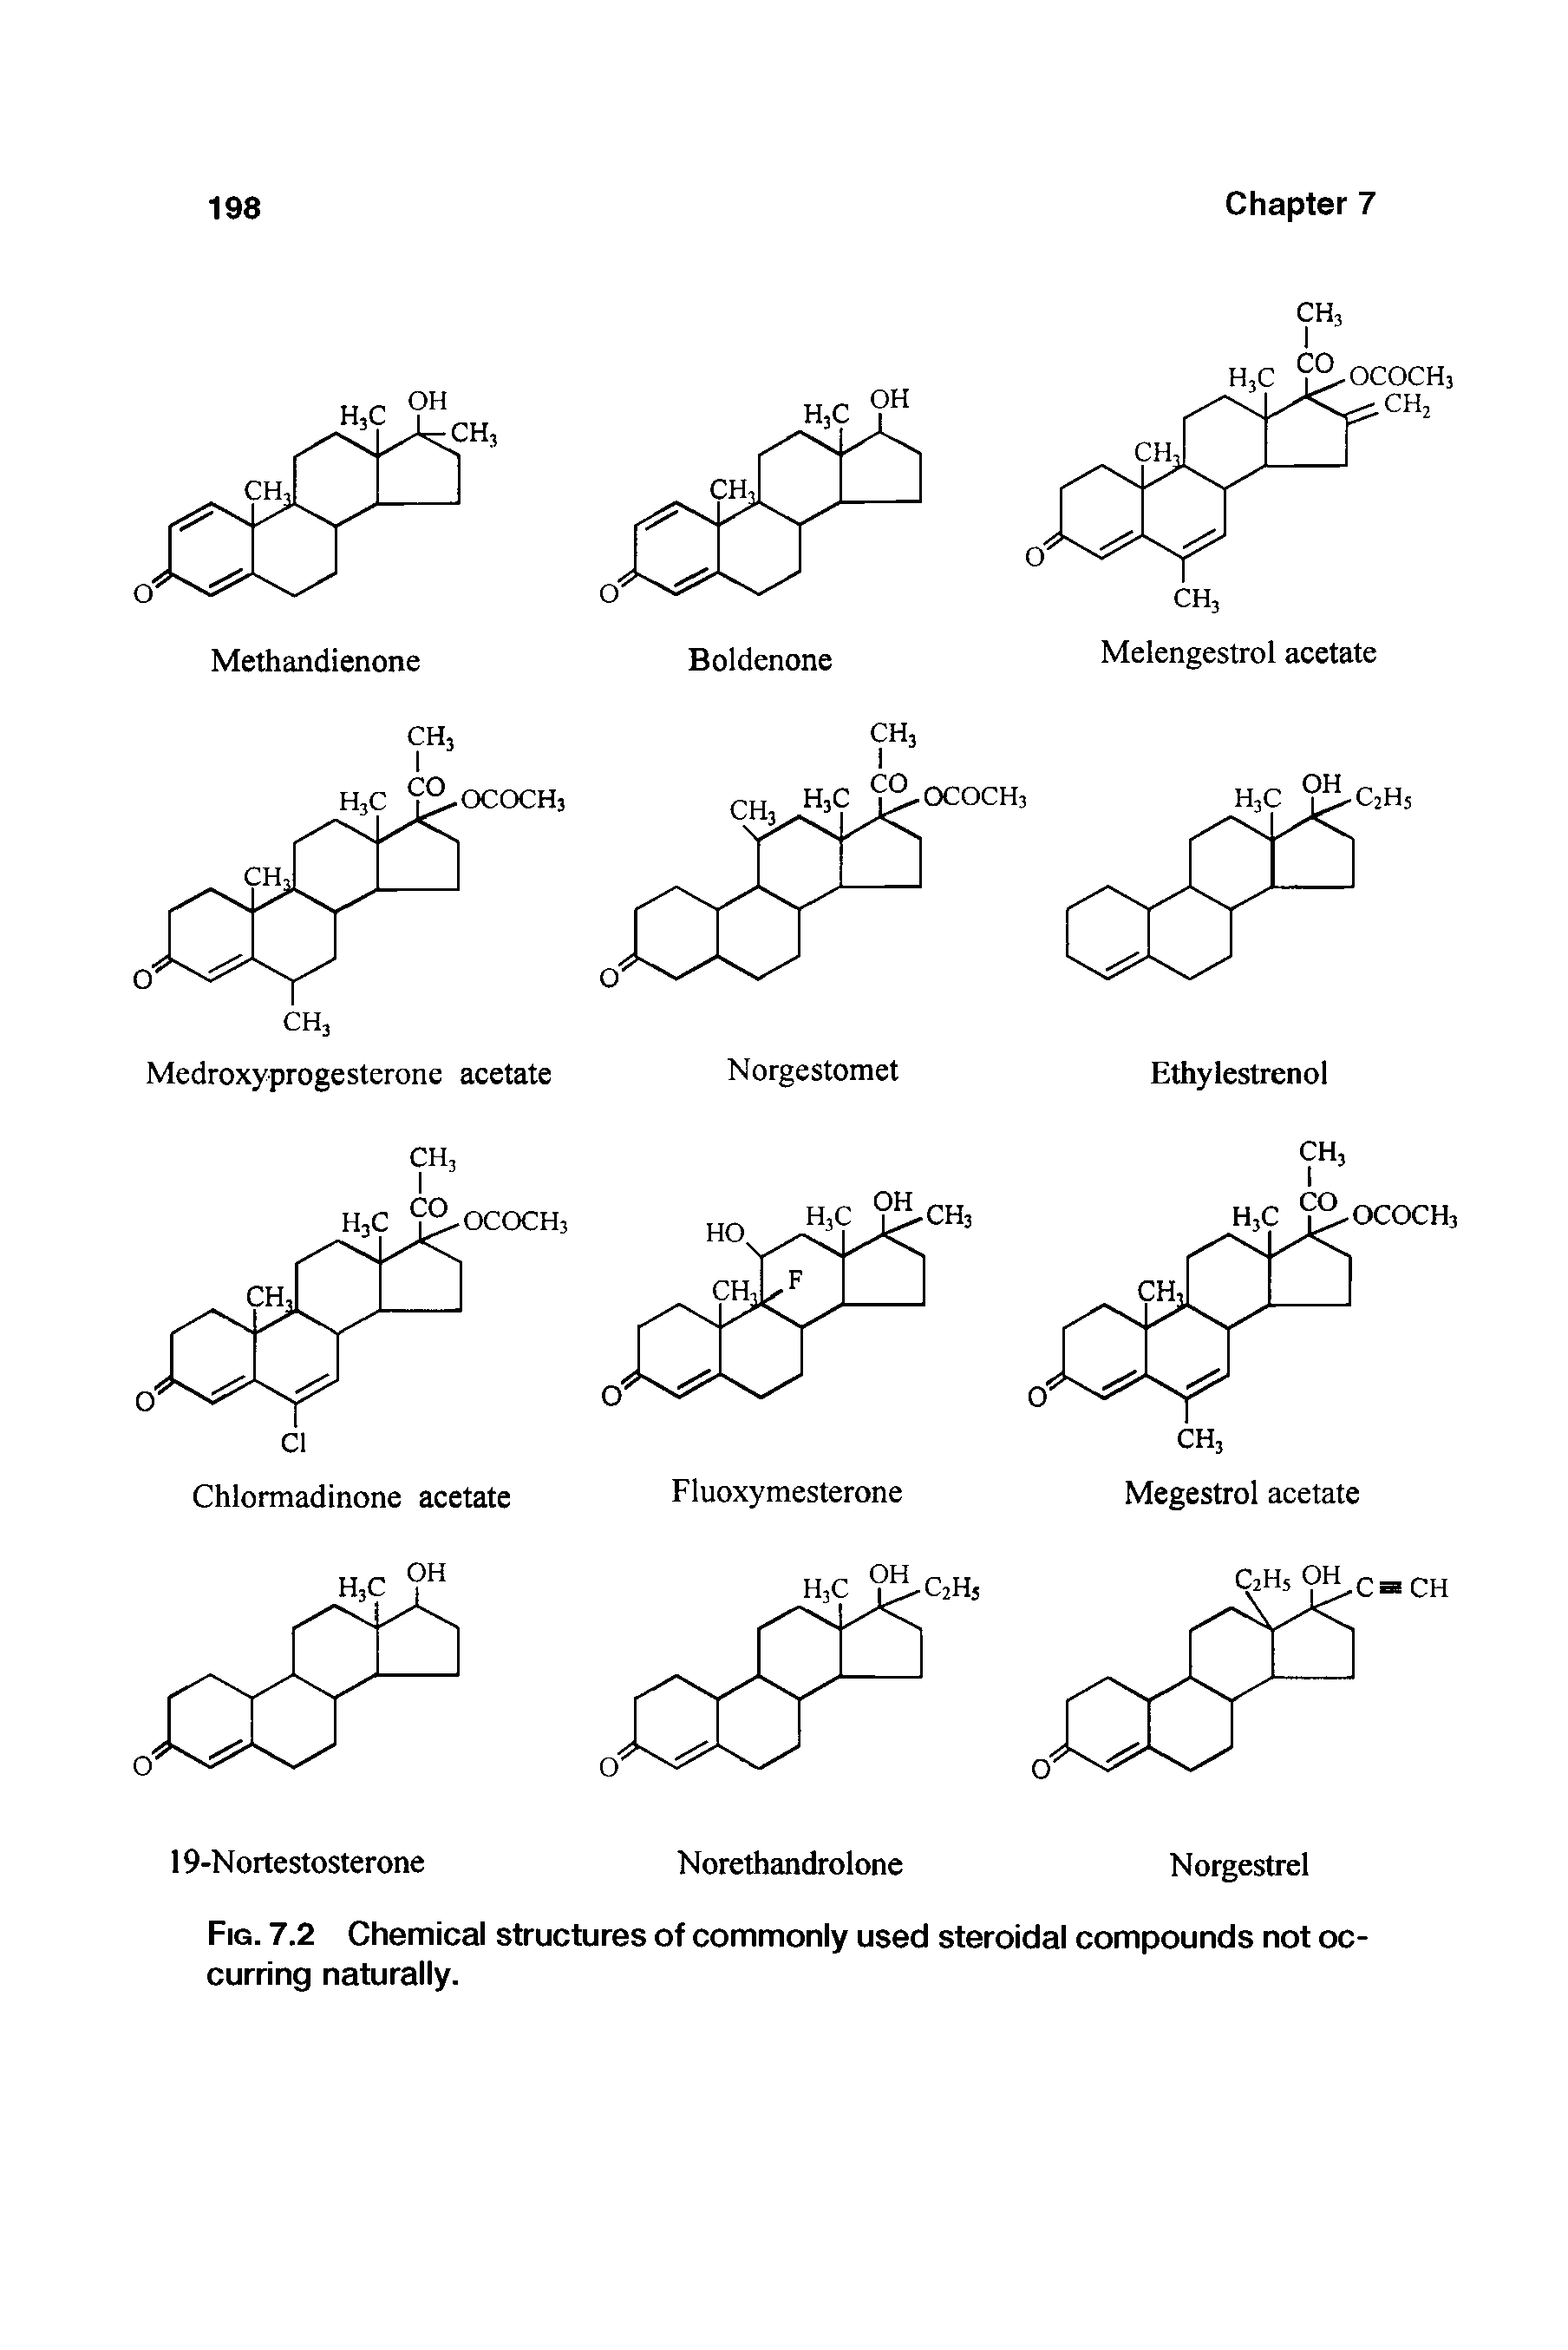 Fig. 7.2 Chemical structures of commonly used steroidal compounds not occurring naturally.